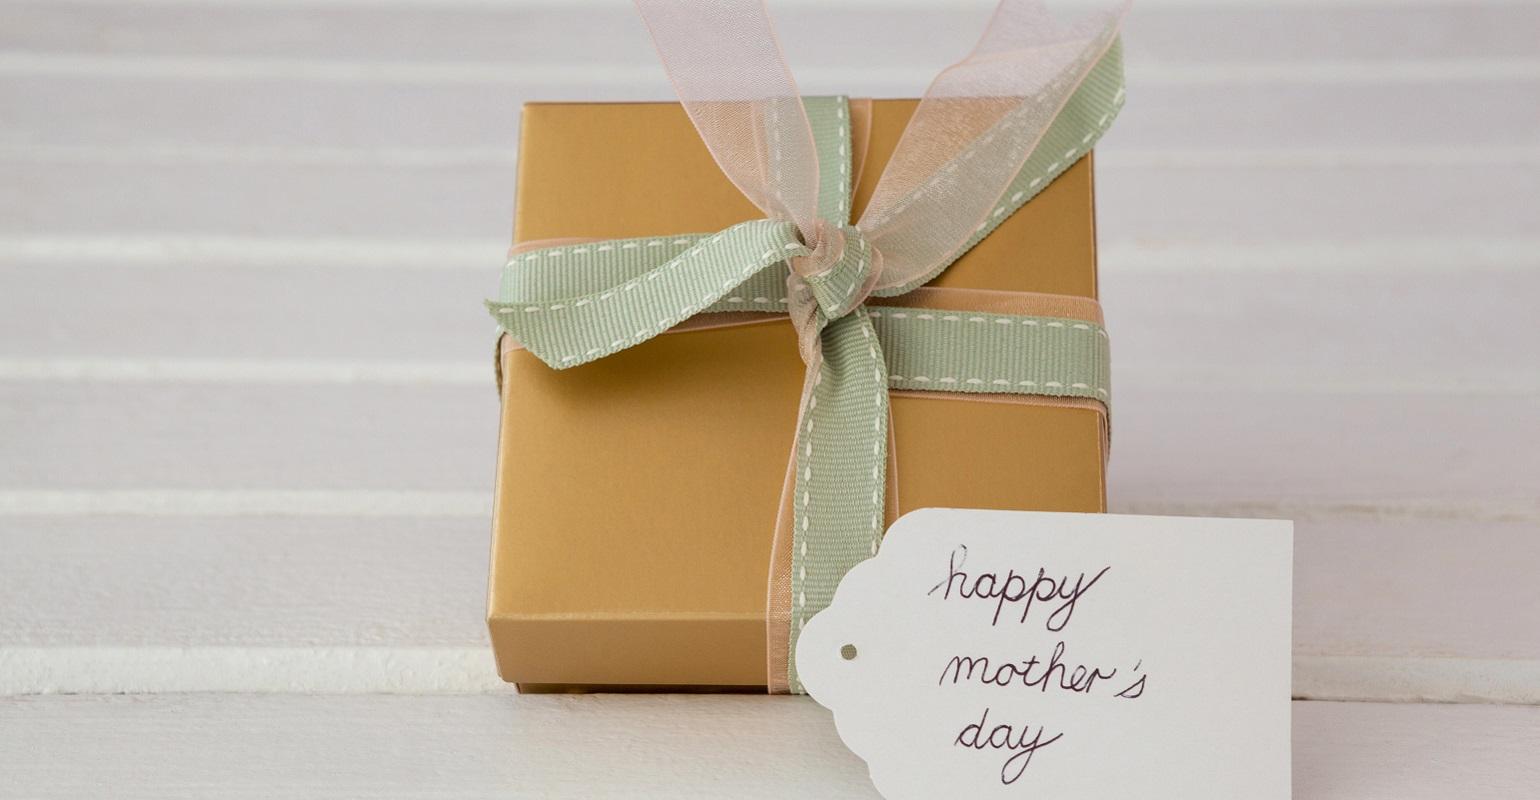 Top 10 Tech Gifts for Every Type of Mom  ITPro Today: IT News, How-Tos,  Trends, Case Studies, Career Tips, More